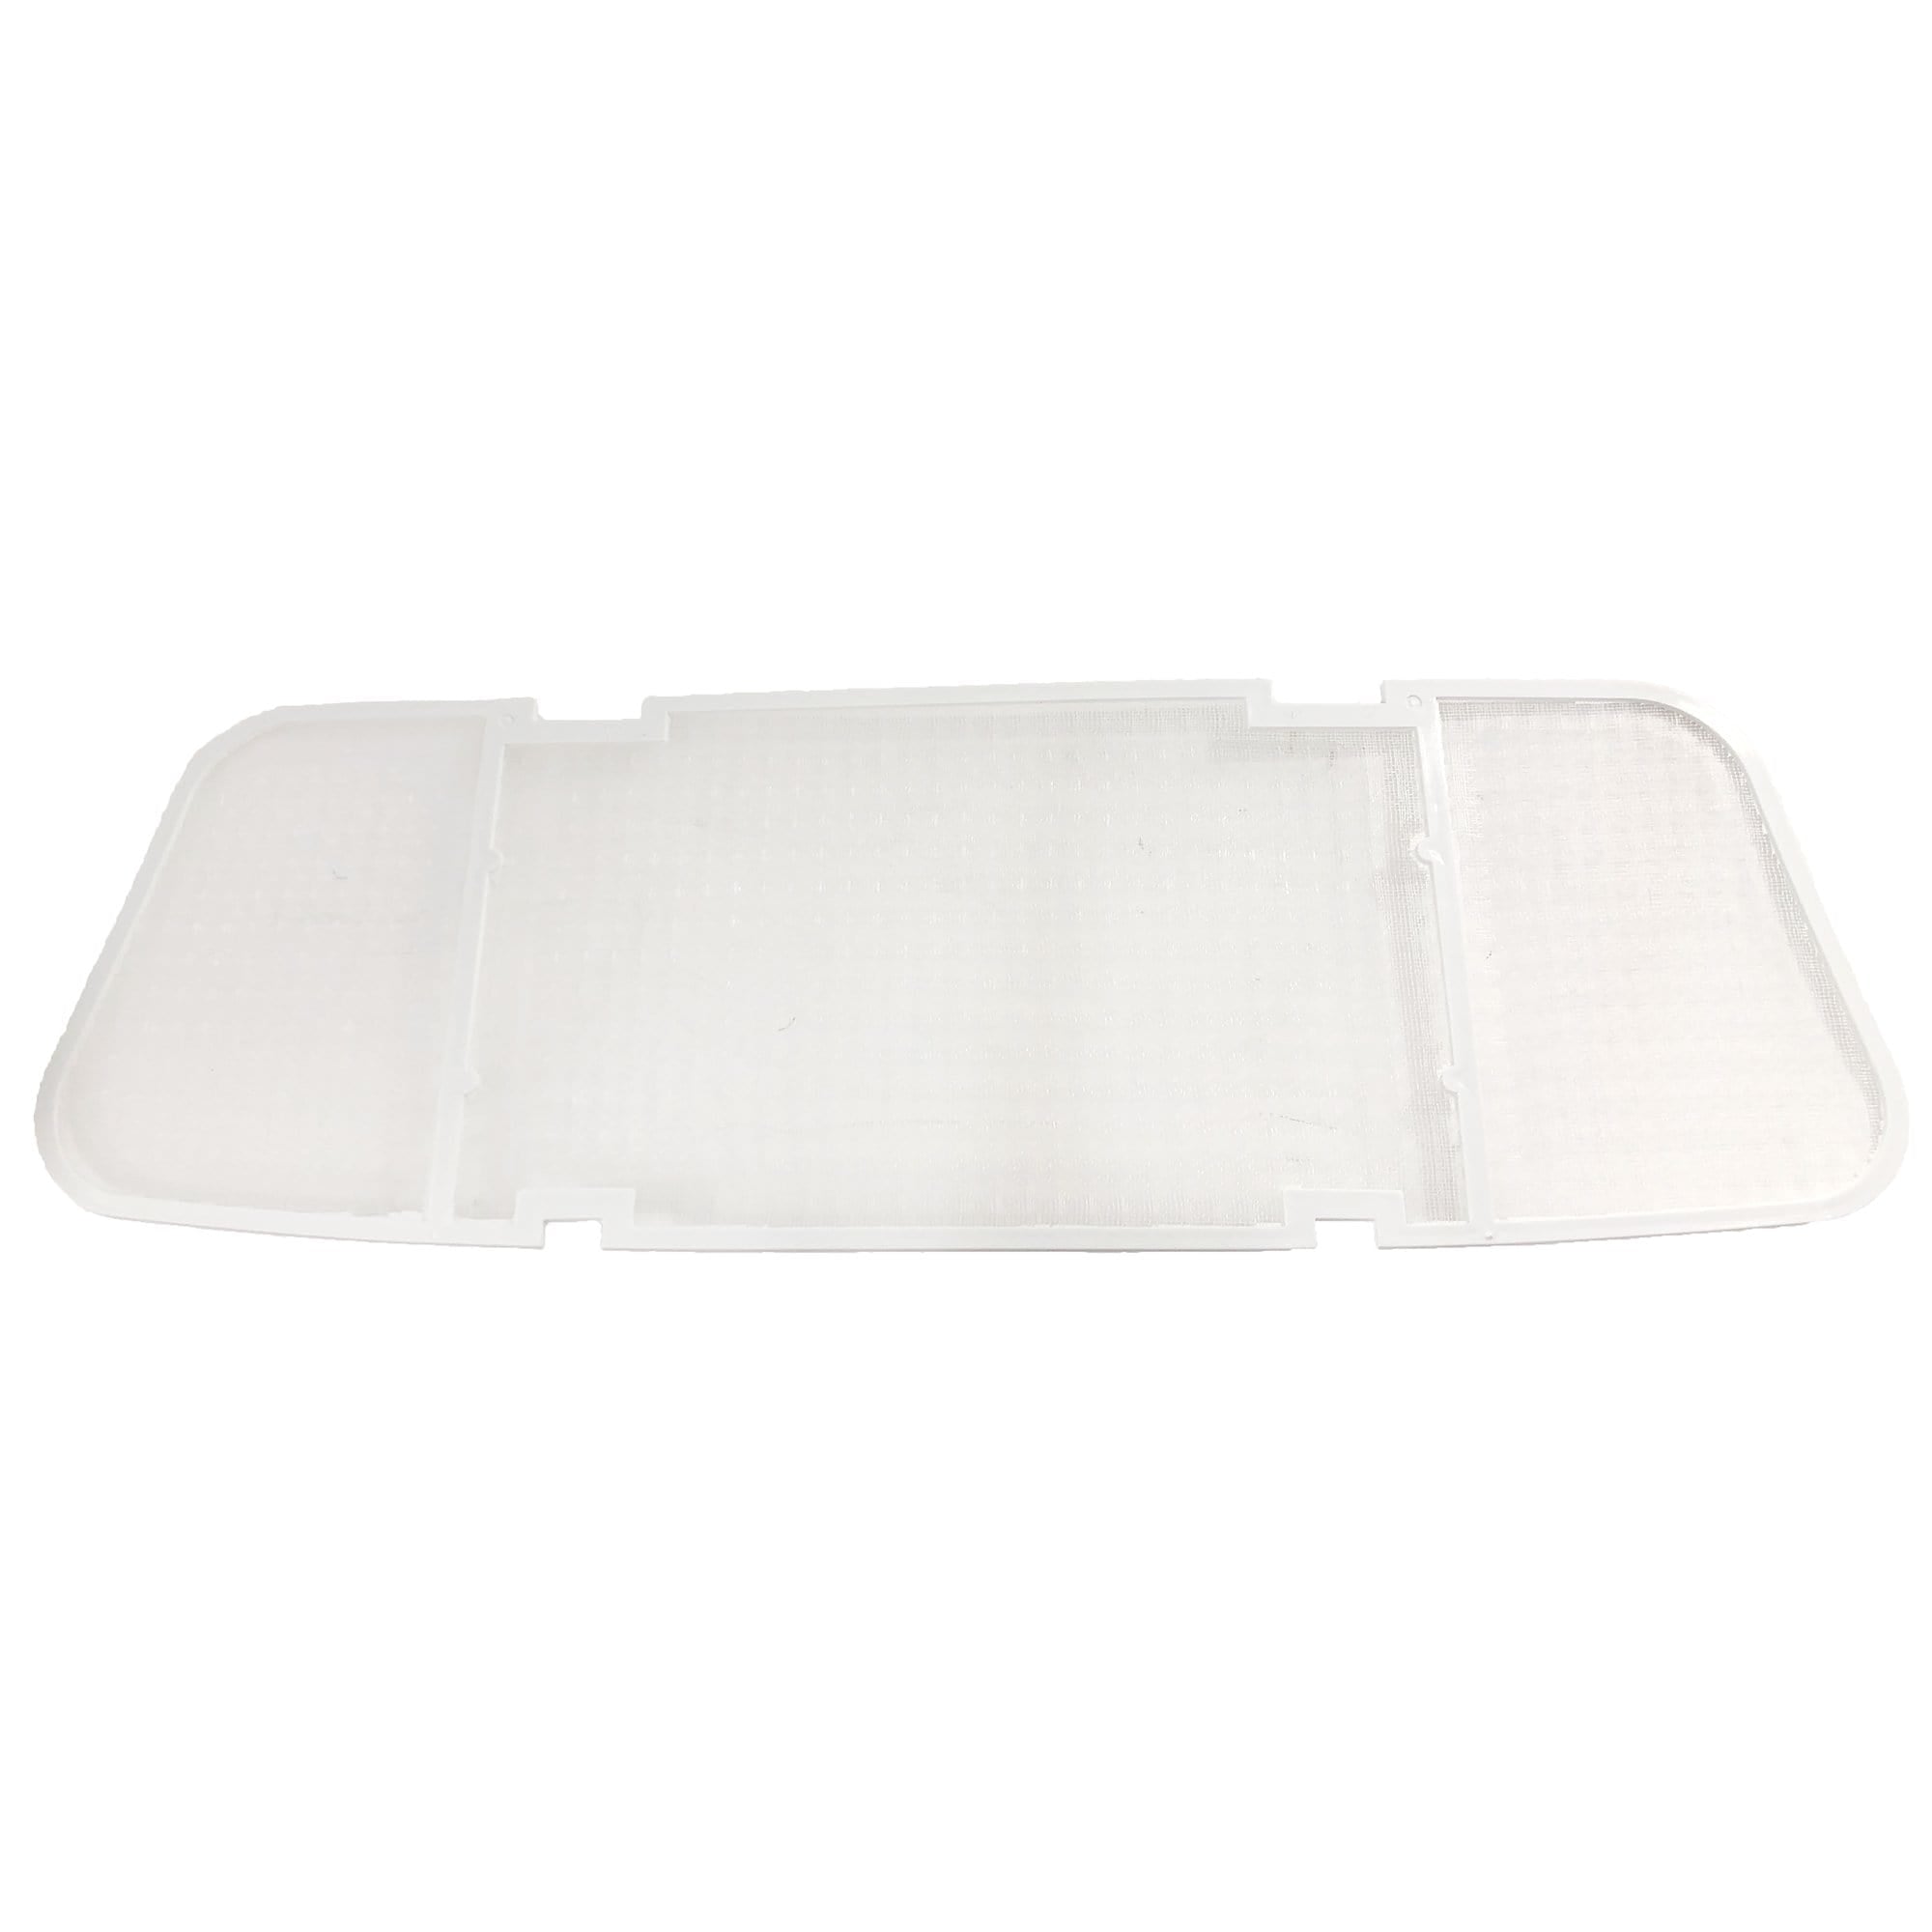 Dometic 3315333.003 Polar White Air Distribution Box Replacement Filter